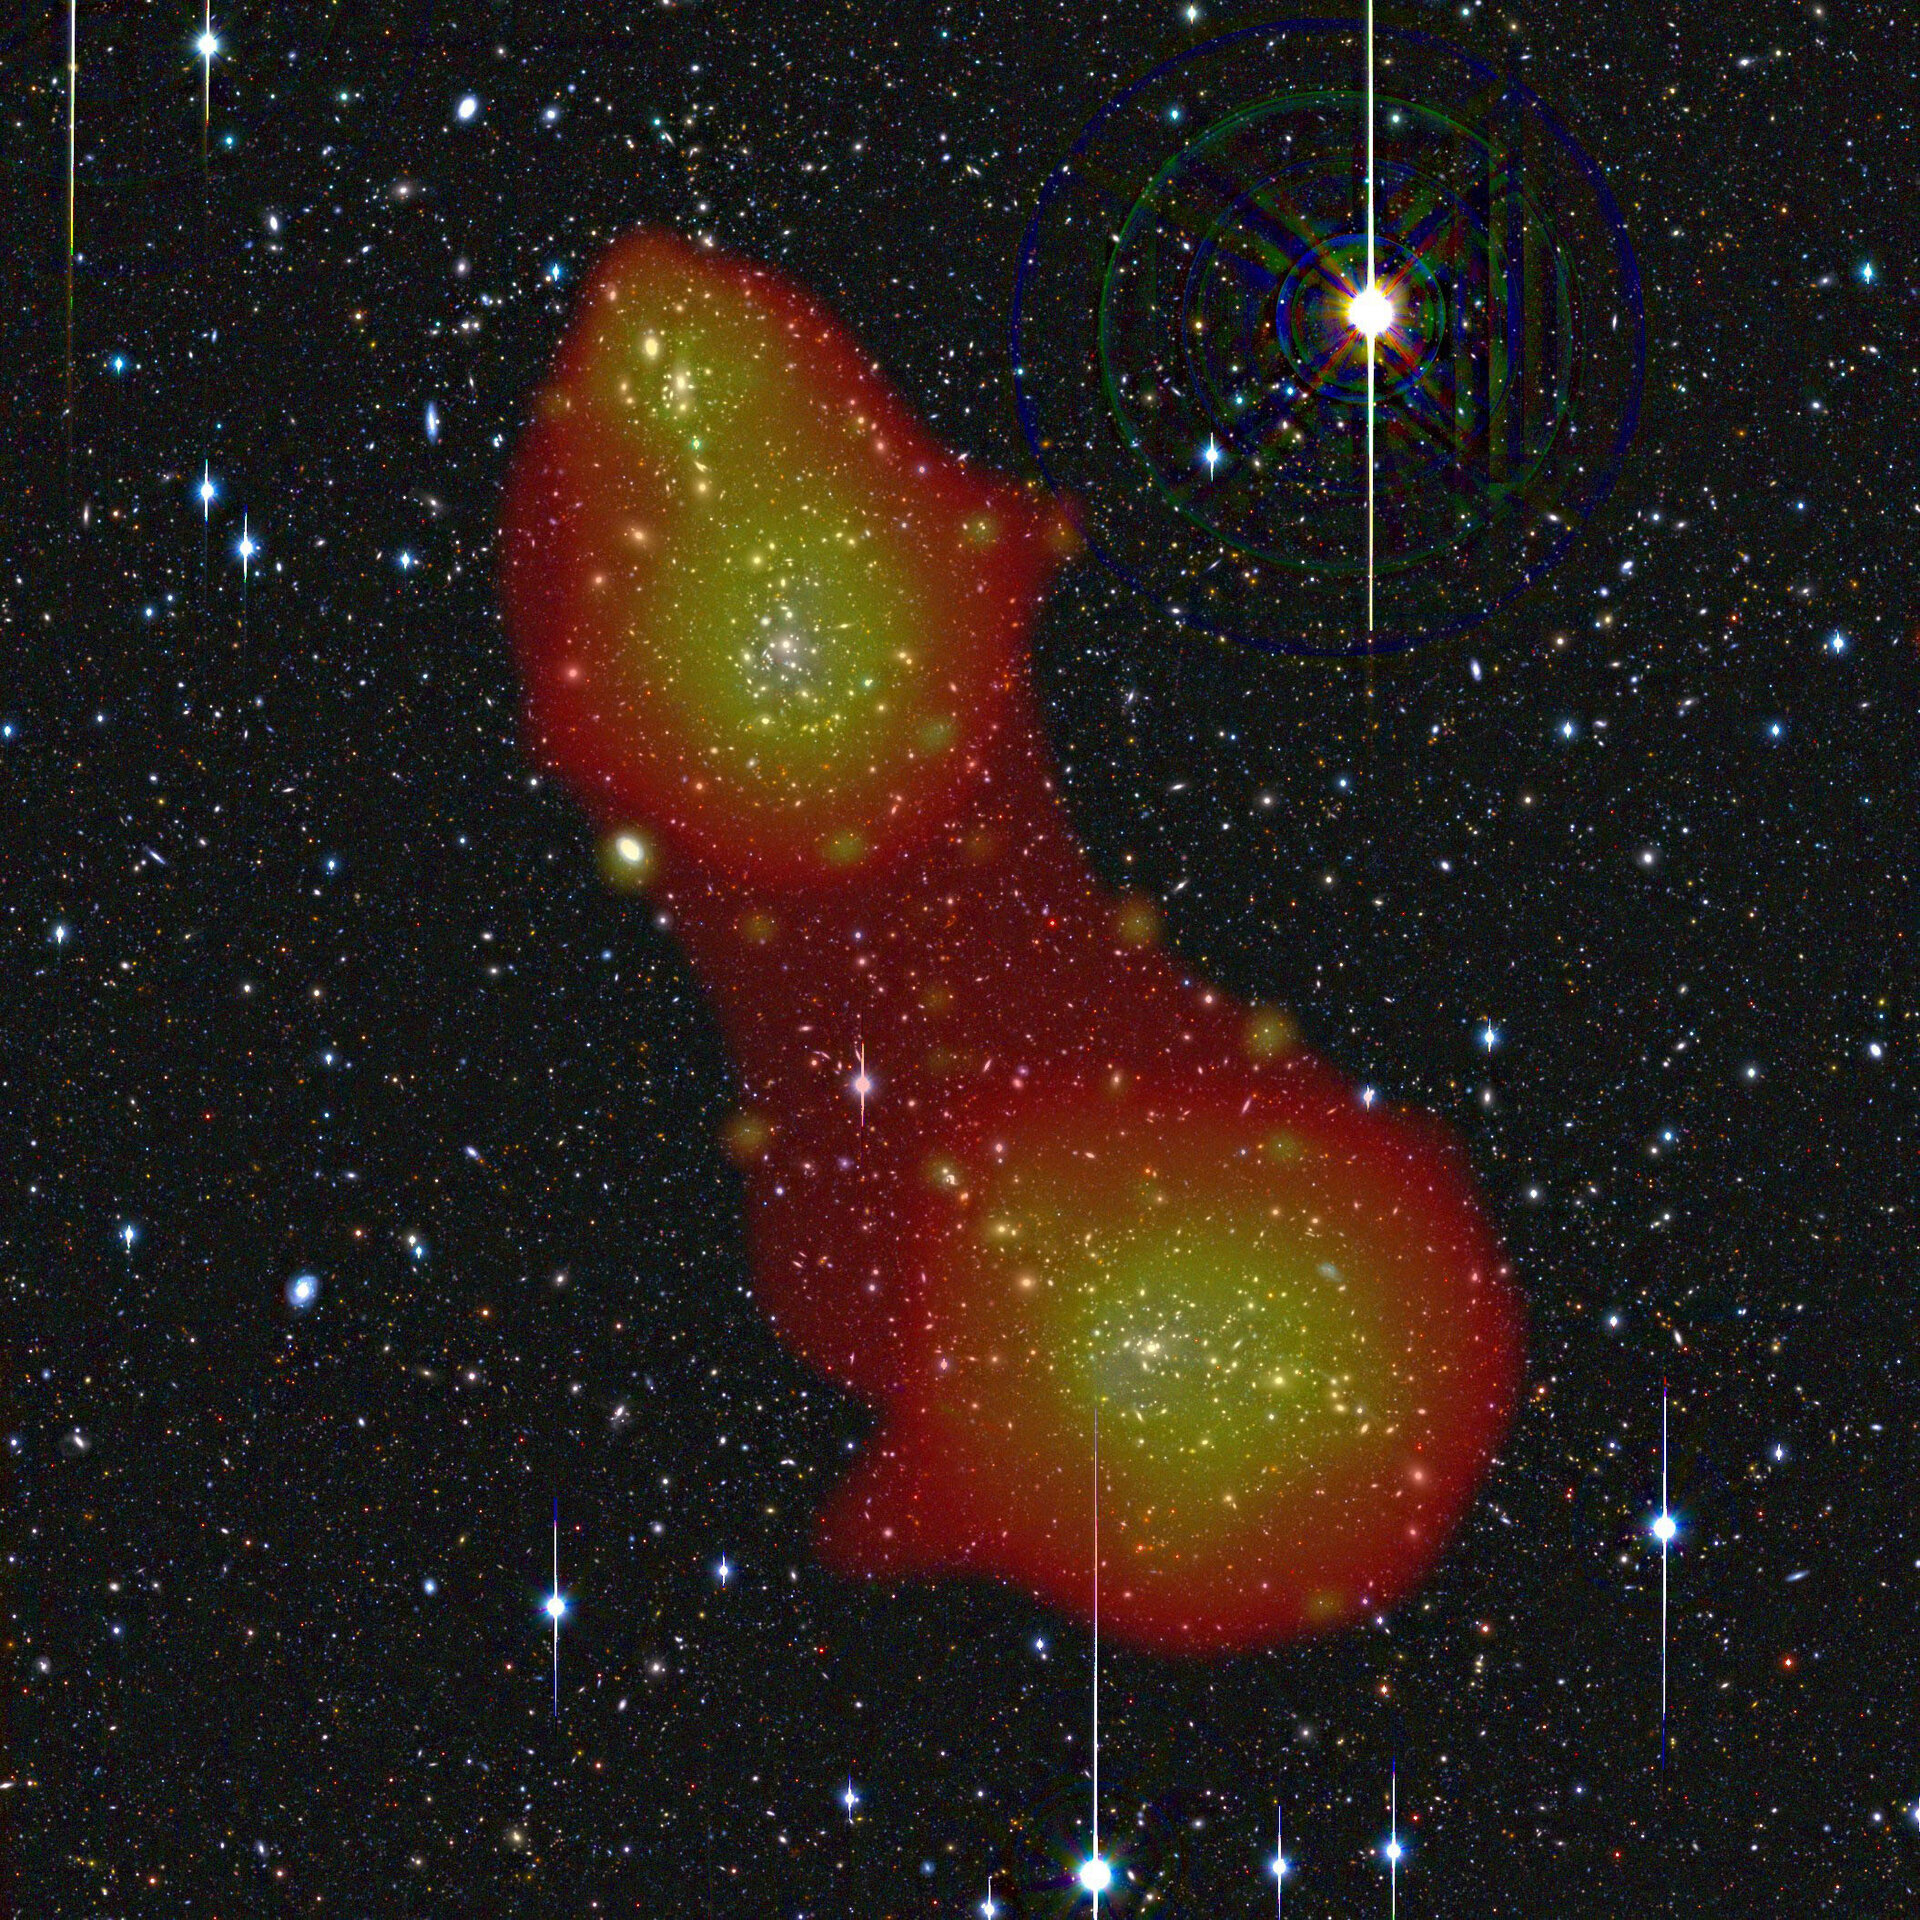 Galaxy clusters Abell 222 and Abell 223